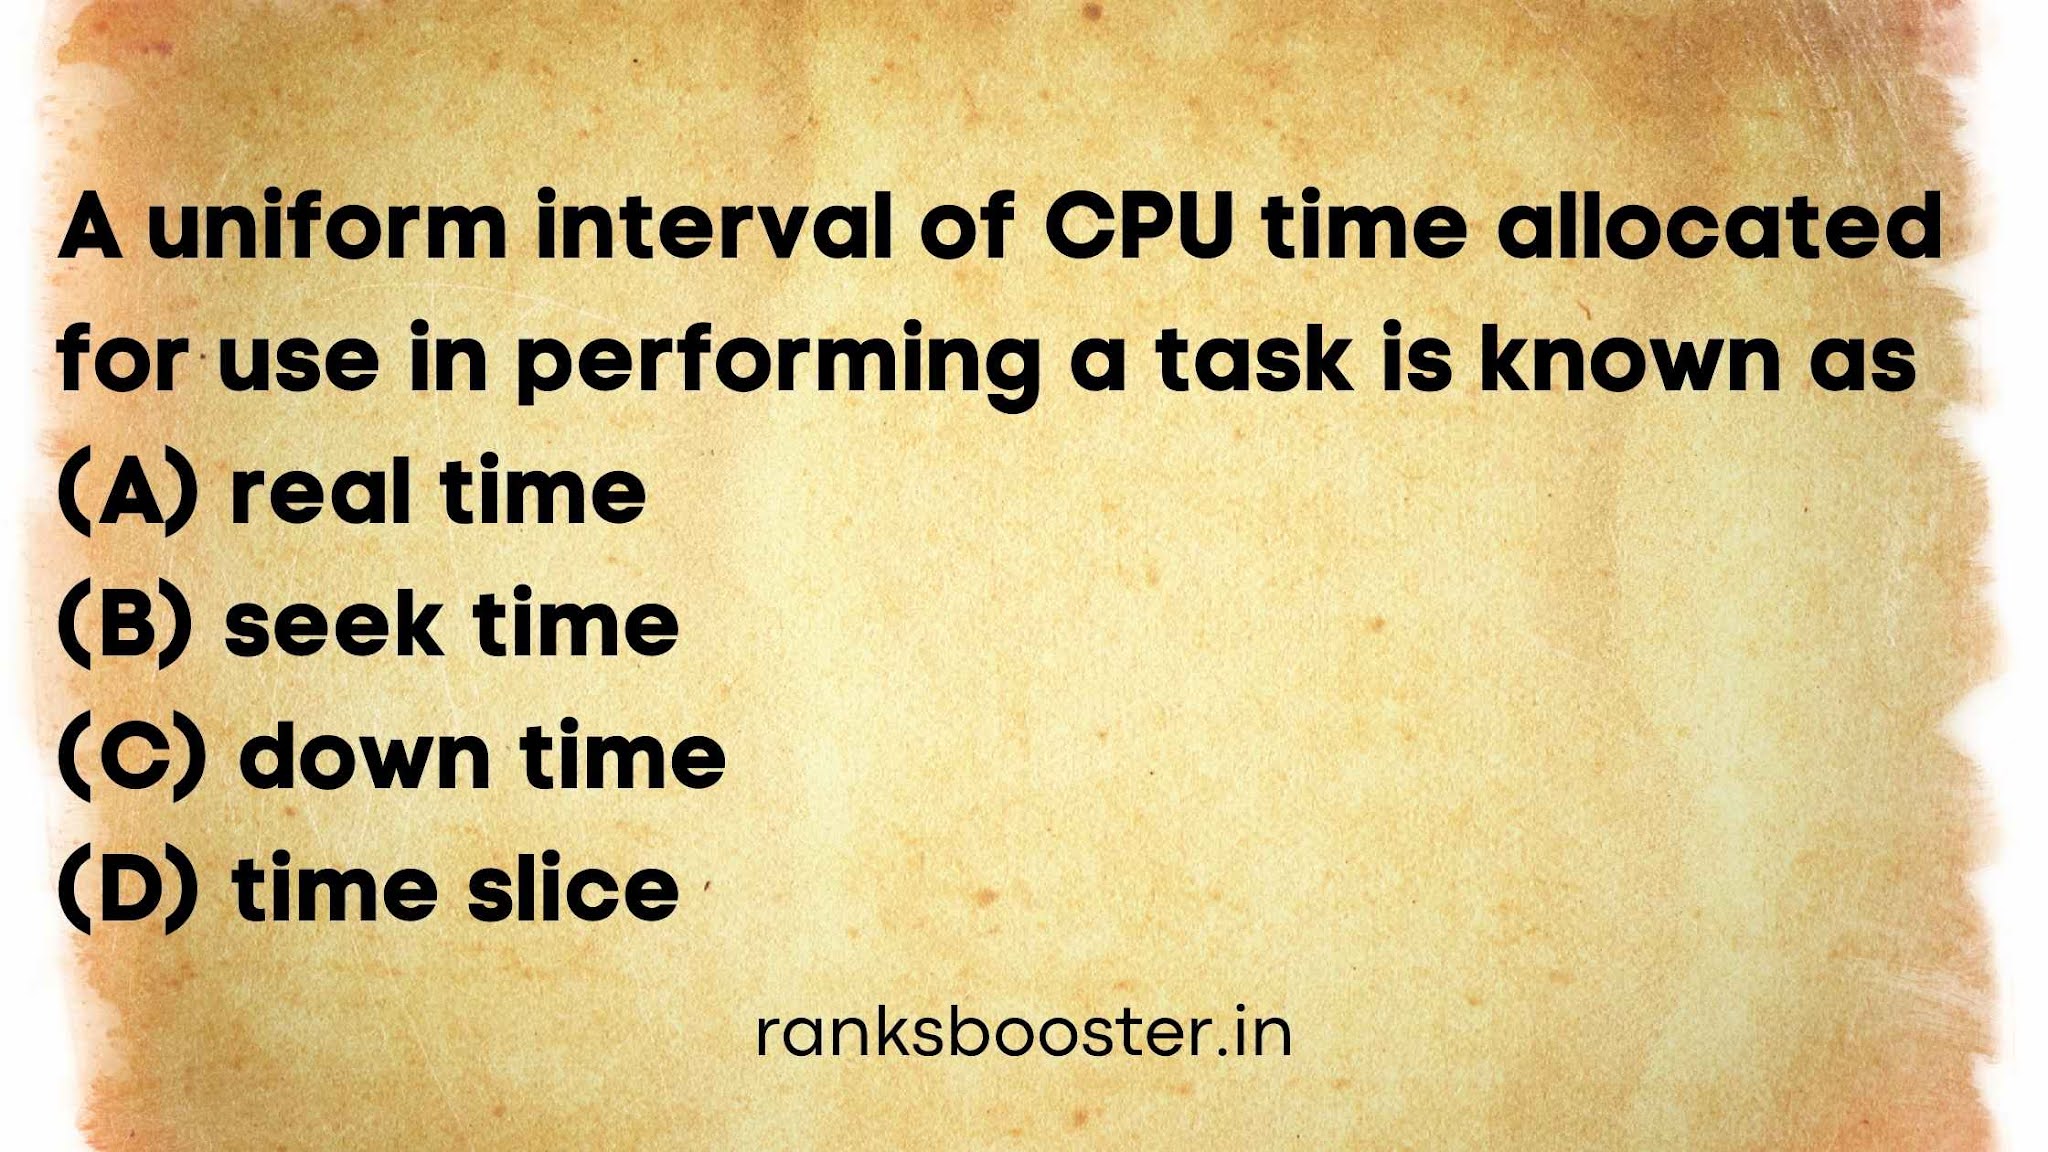 A uniform interval of CPU time allocated for use in performing a task is known as (A) real time (B) seek time (C) down time (D) time slice